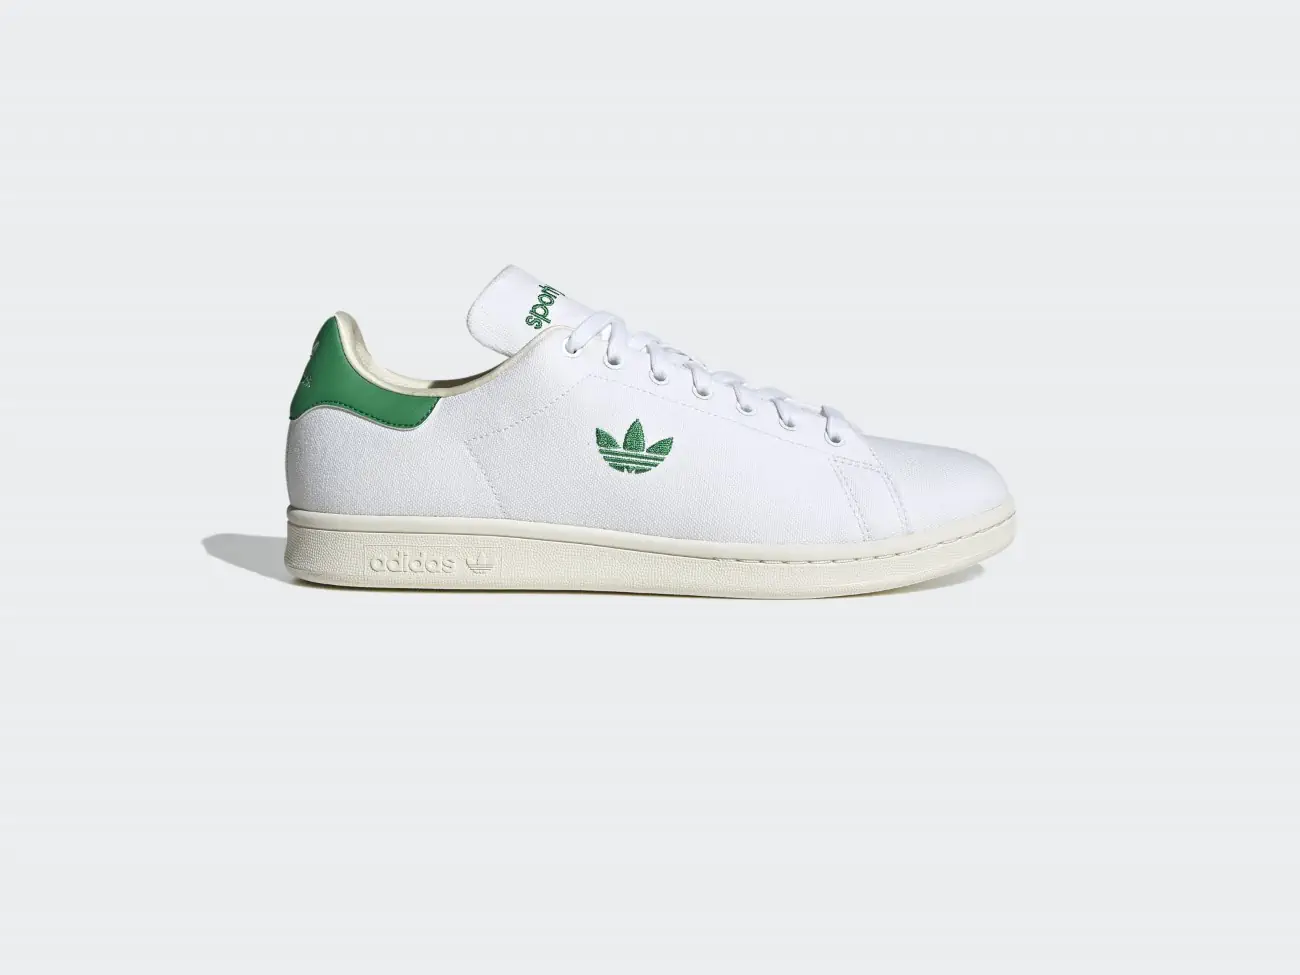 adidas Originals x Sporty & Rich launches third collection